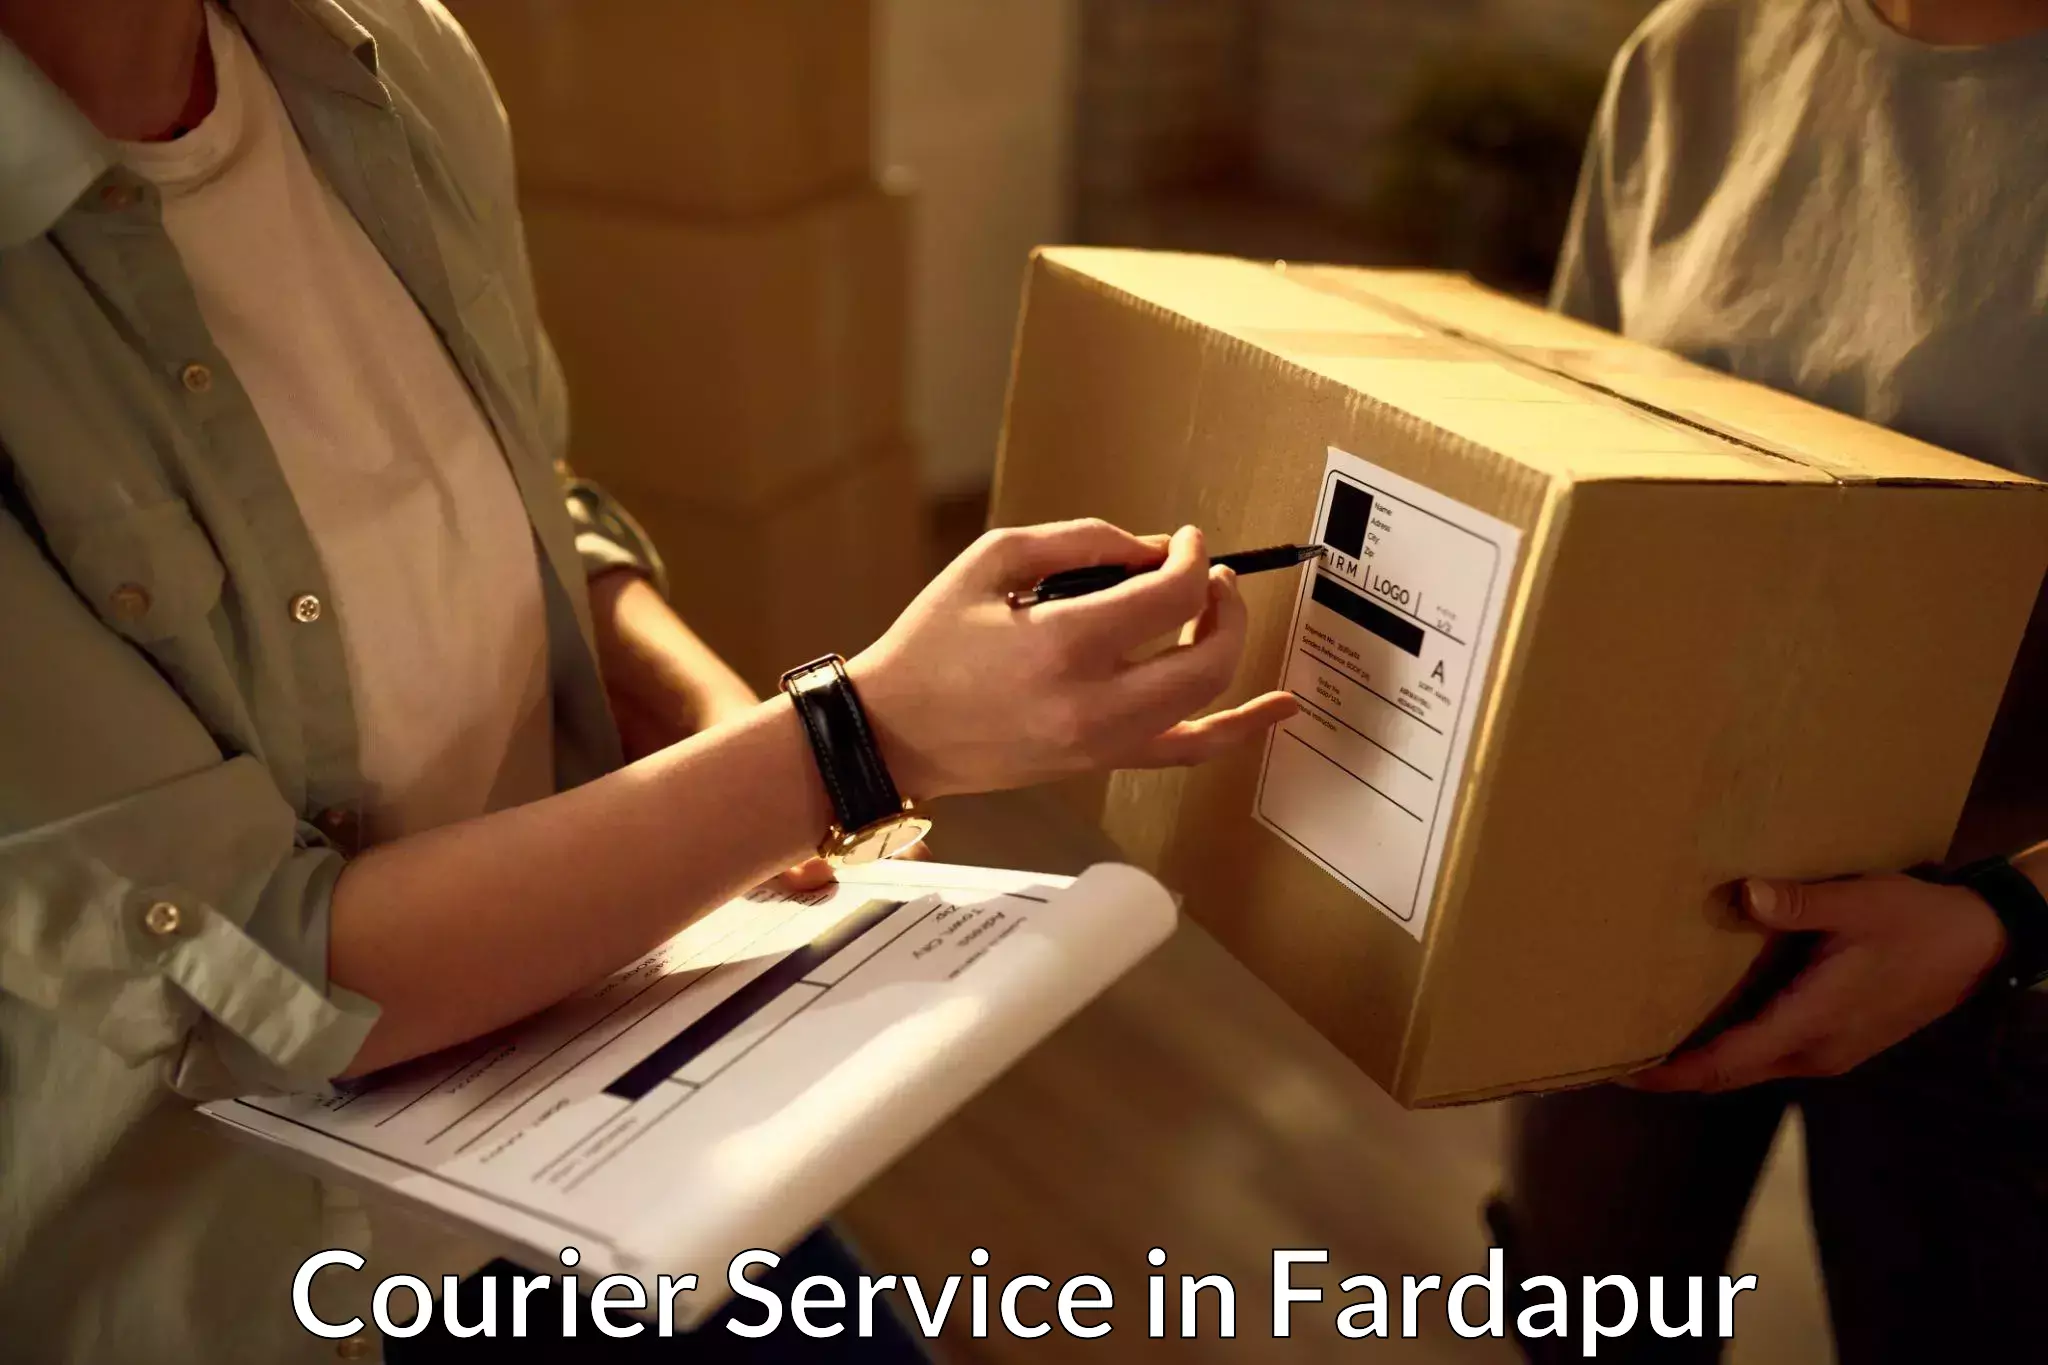 Secure package delivery in Fardapur